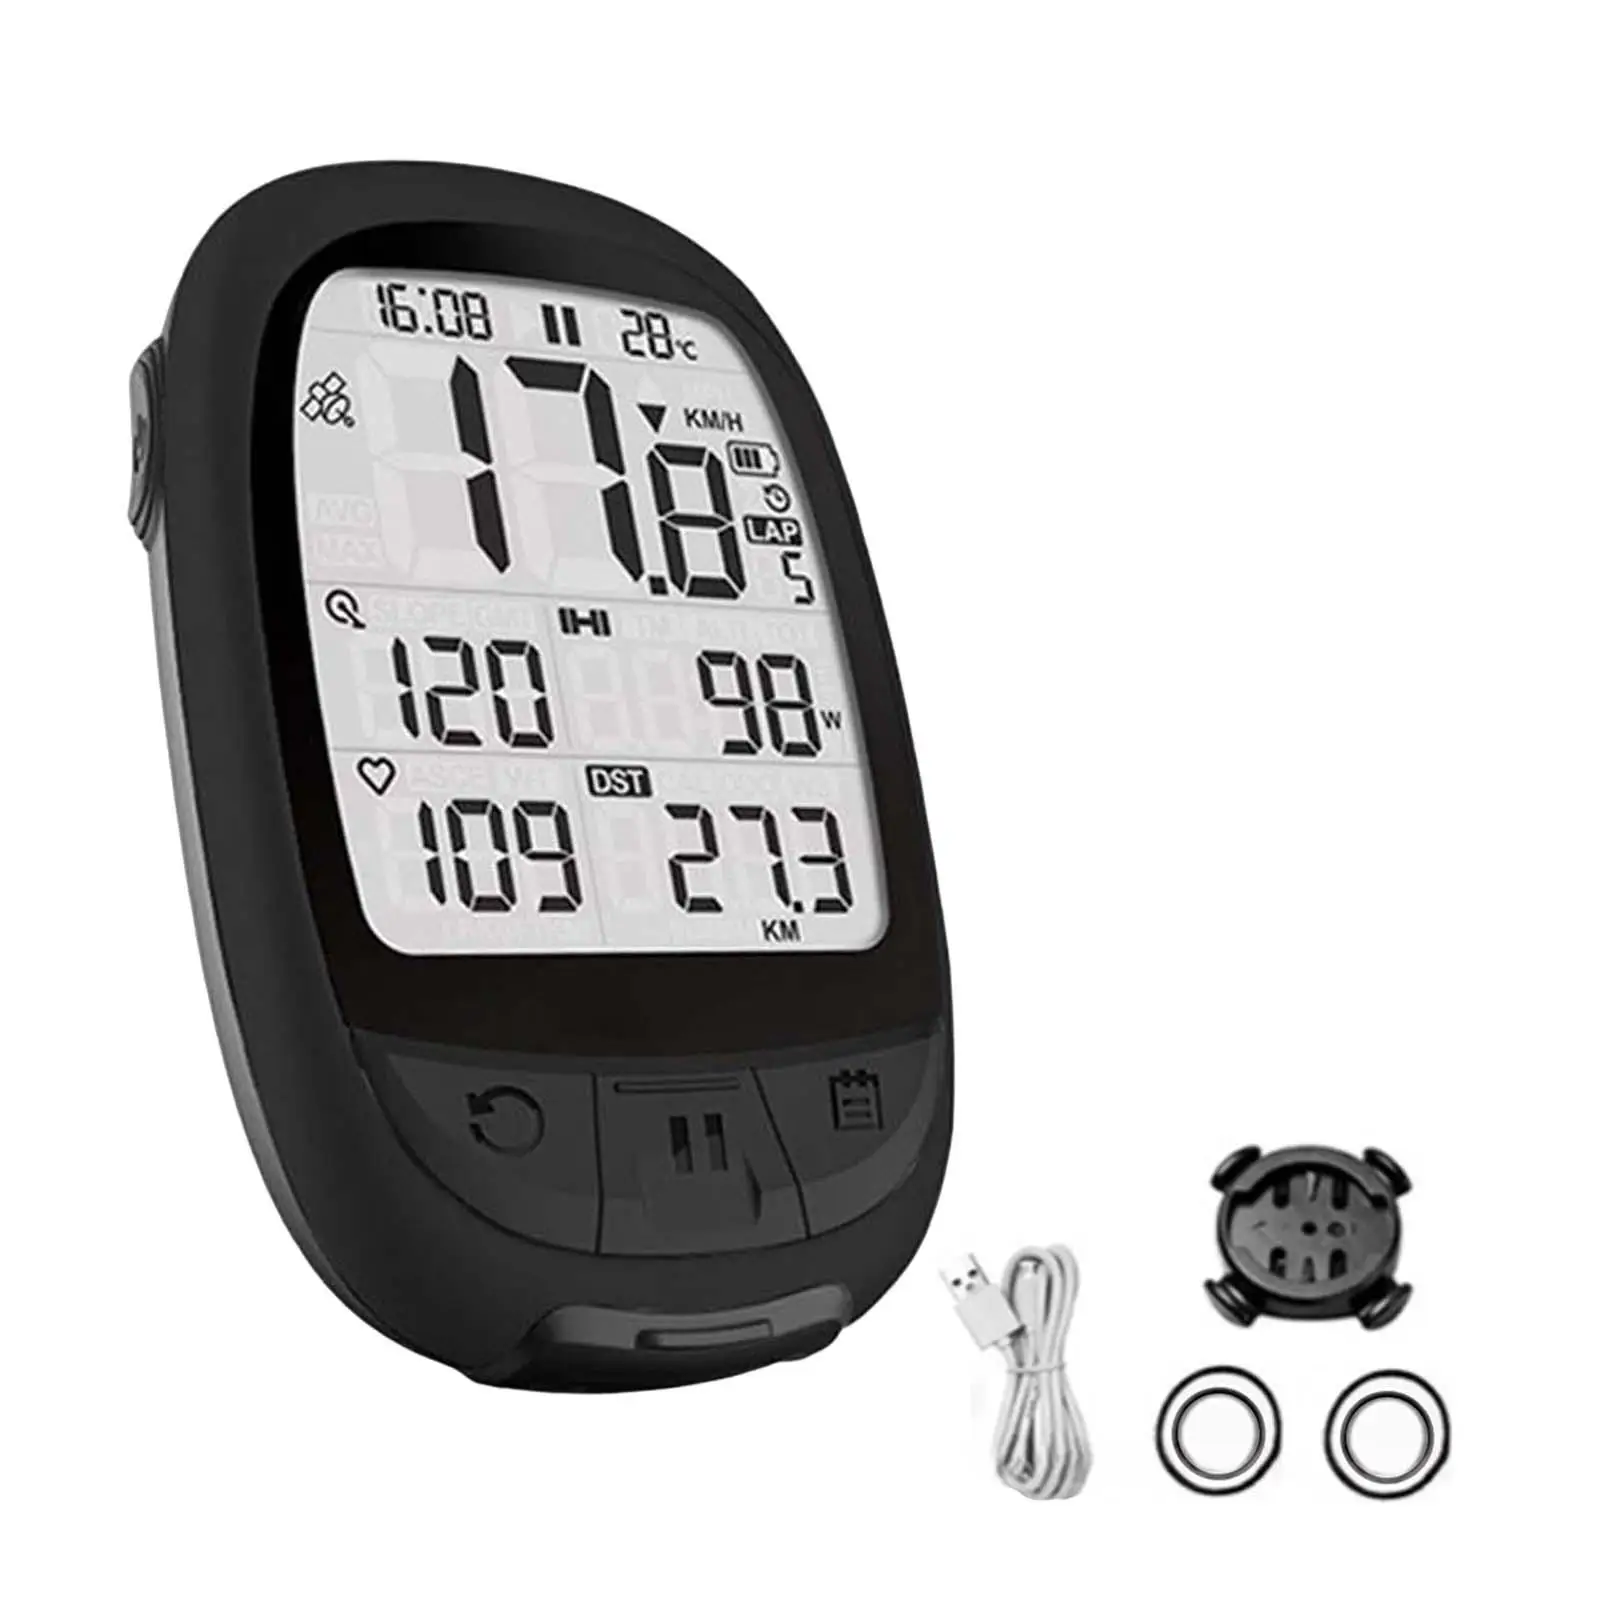 Bicycle Computer GPS Navigation ANT BT 4.0 USB Rechargeable Heart Rate Monitor Stopwatch Bike Odometer Speedometer Bike Computer